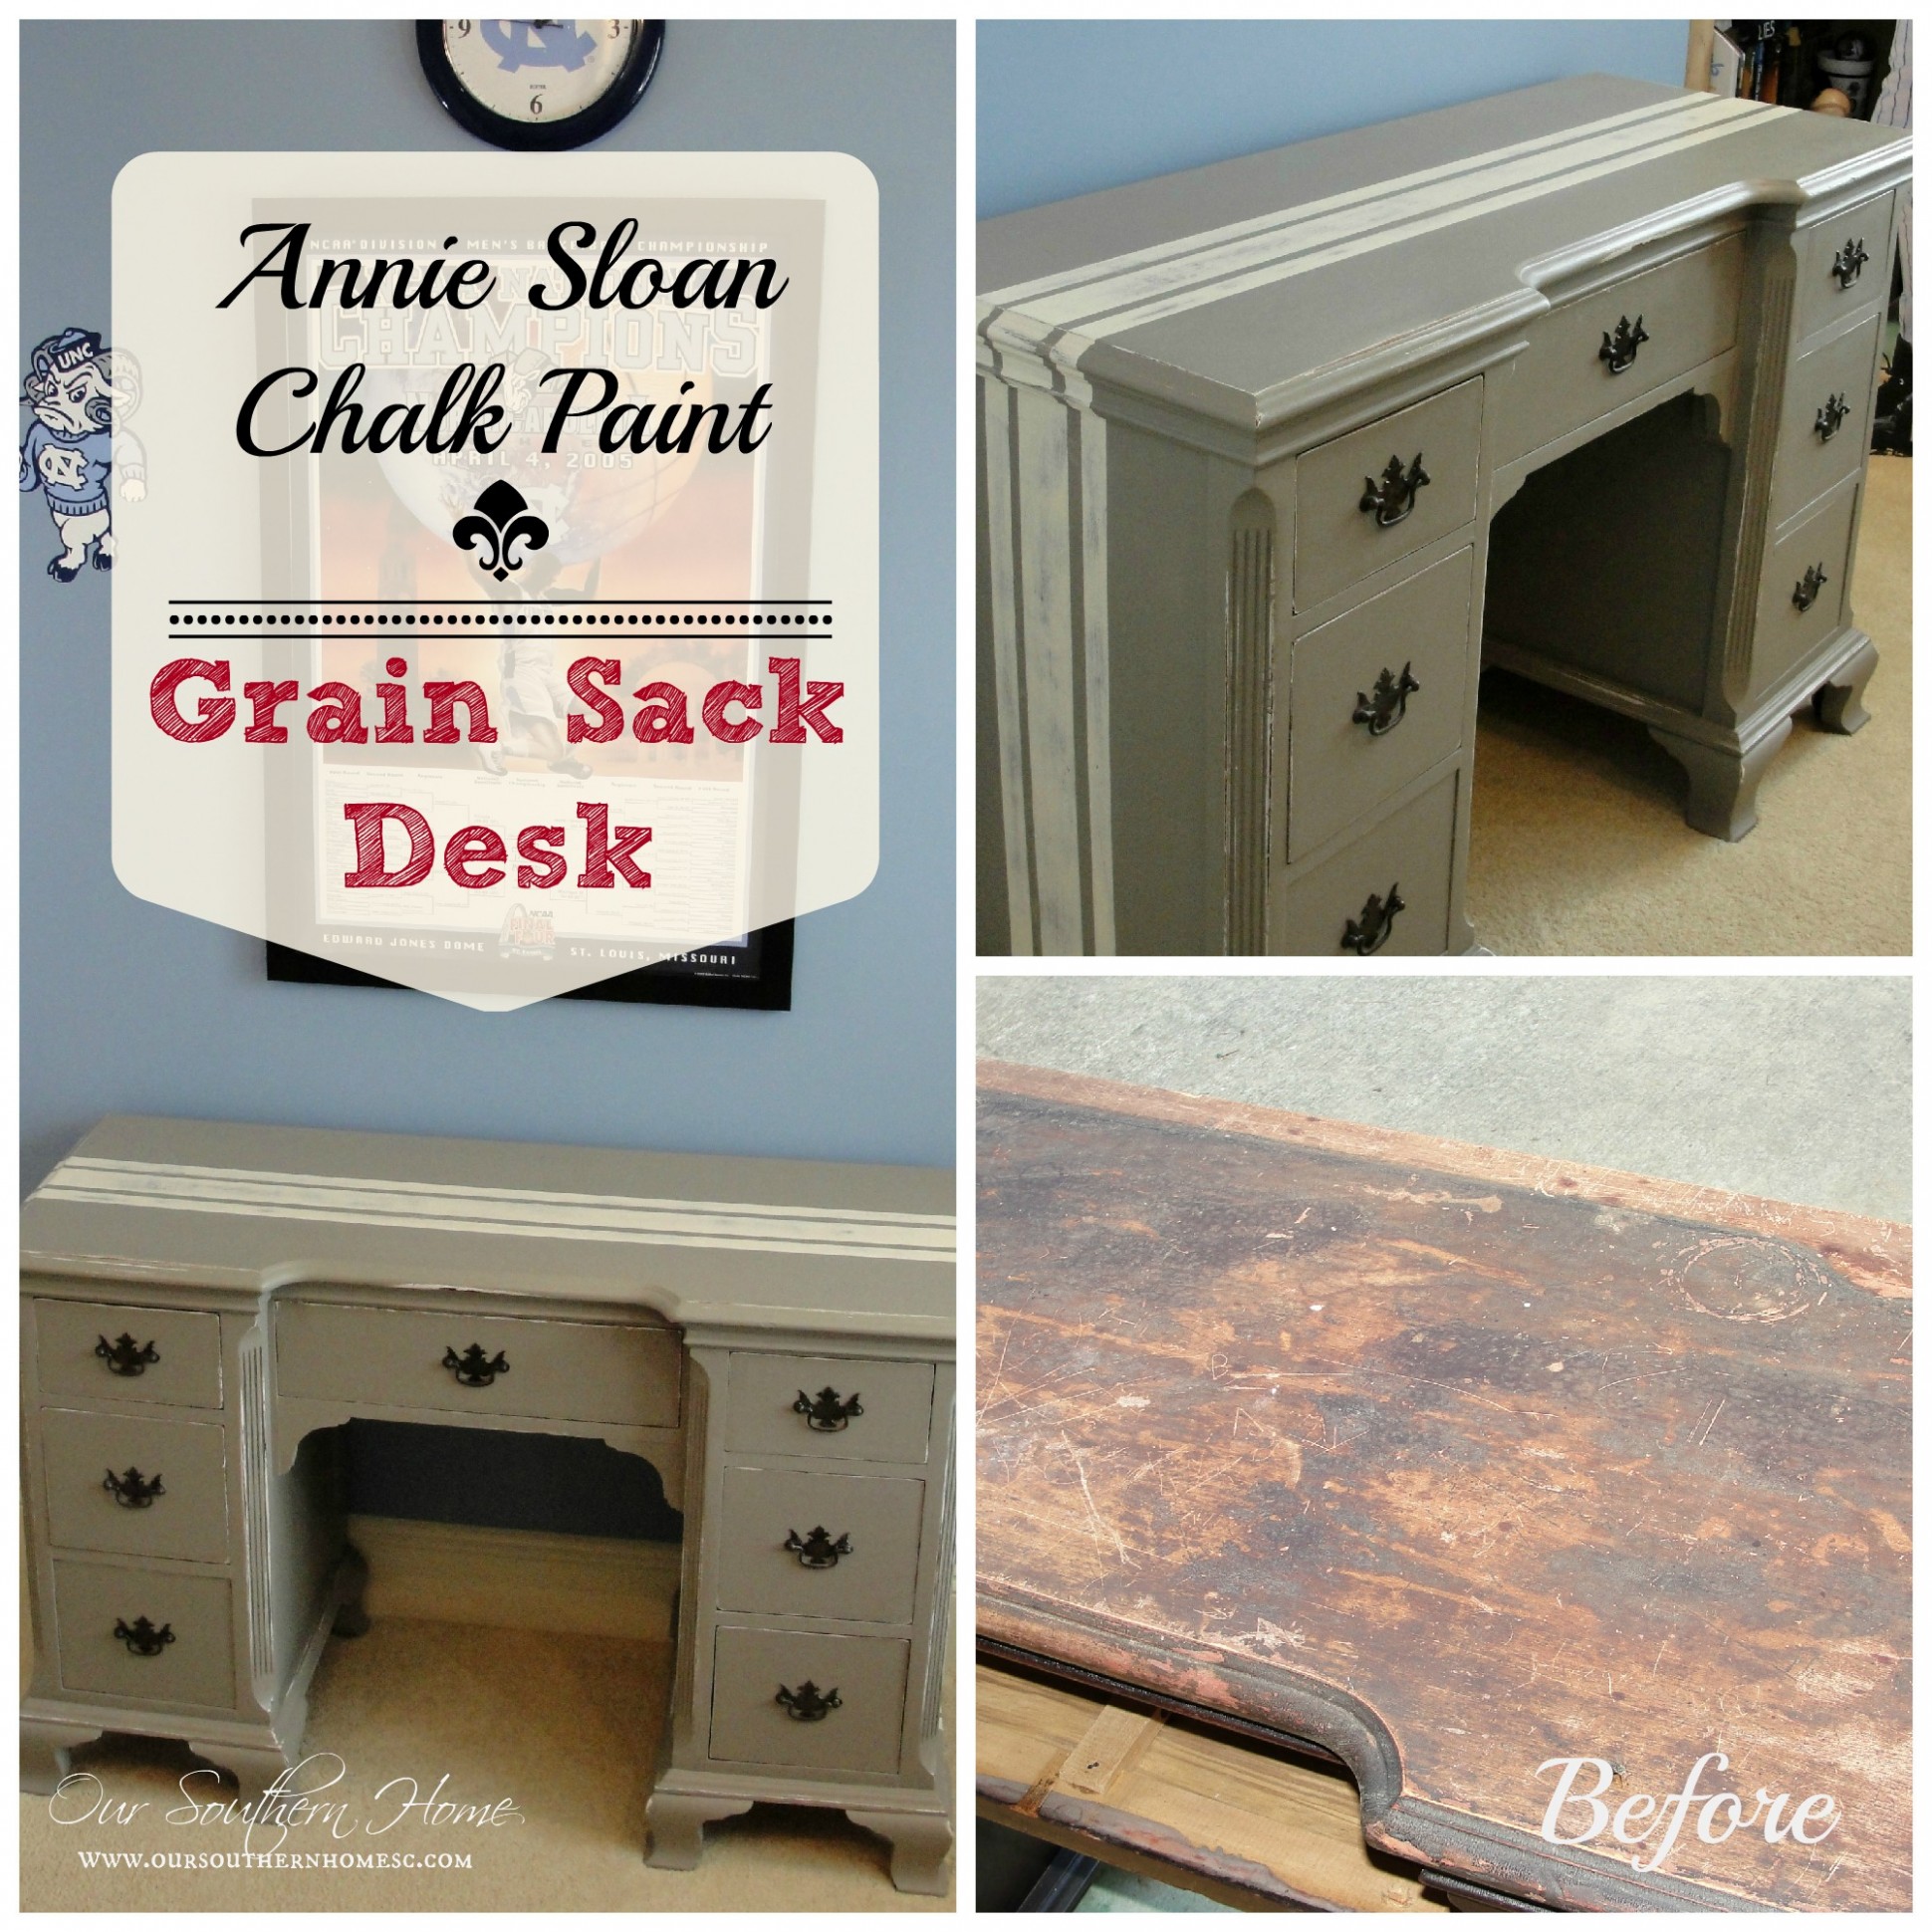 Grain Sack Desk Annie Sloan Chalk Paint Our Southern Home Where To Buy Chalk Paint By Annie Sloan